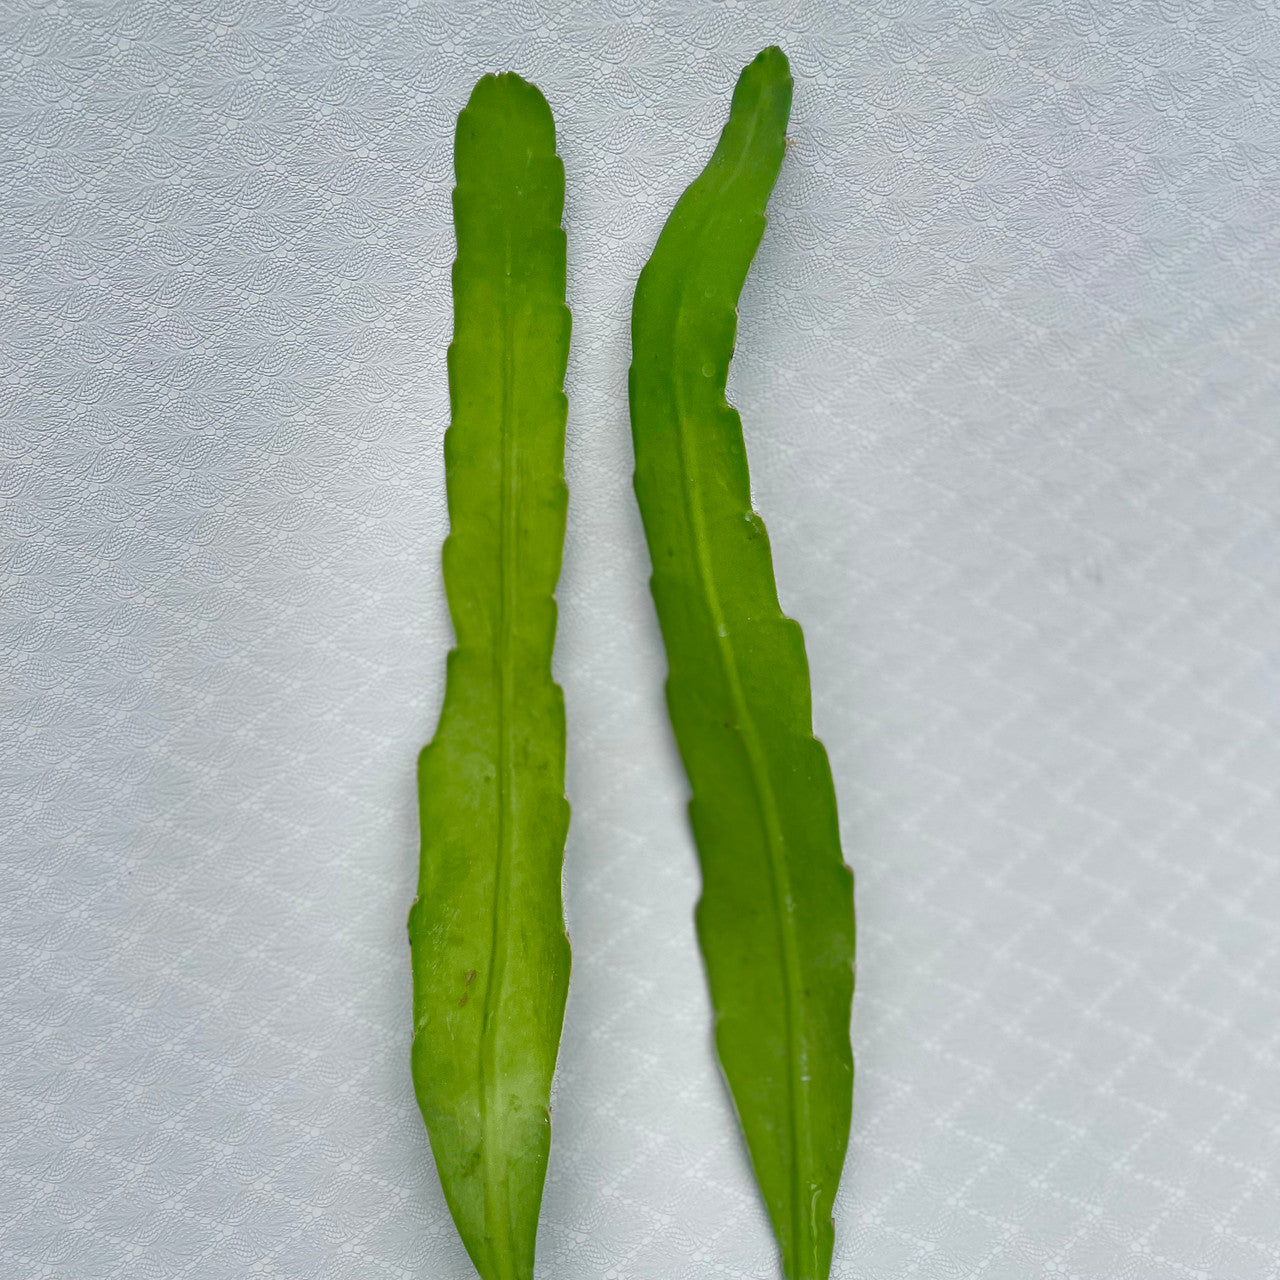 2 Epiphyllum Hookeri (Orchid Cactus) cuttings side by side